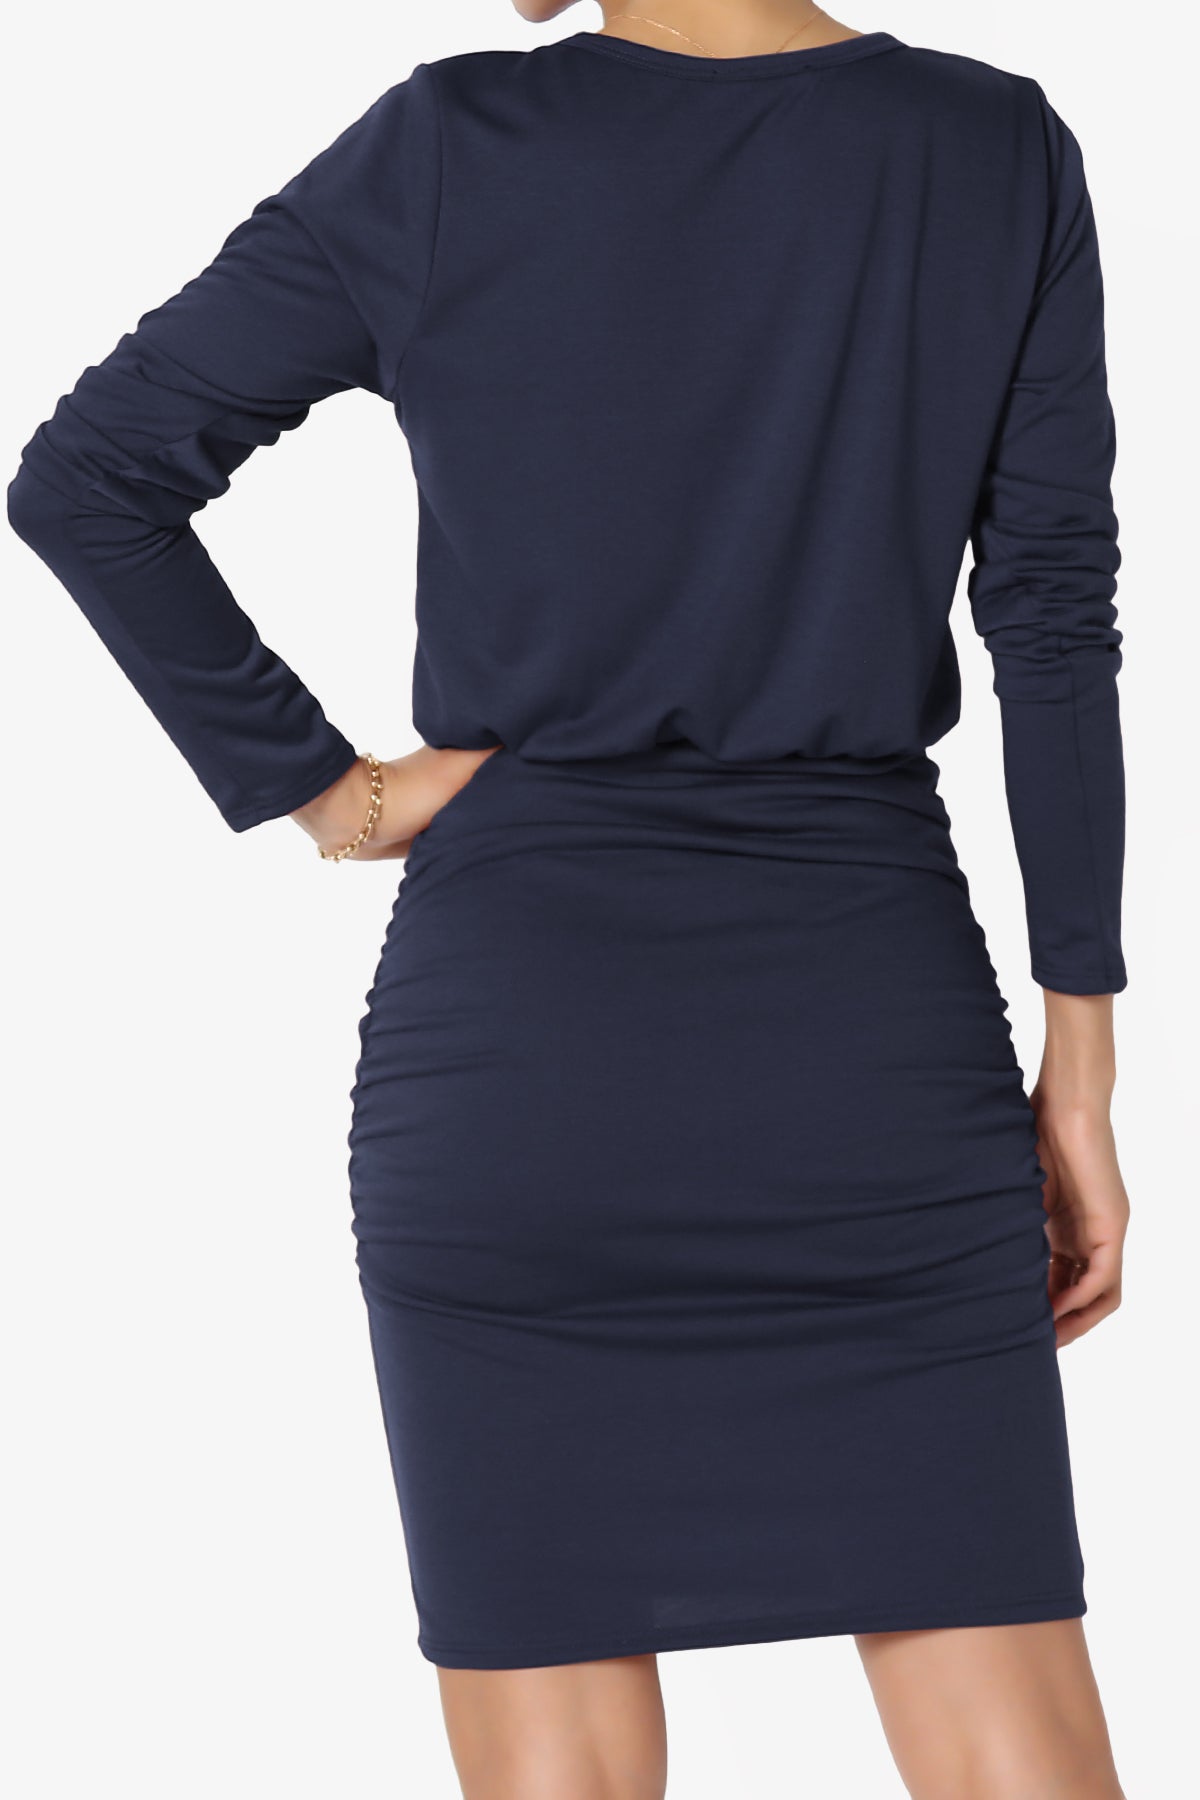 Prowl Ruched Long Sleeve T-Shirt Dress